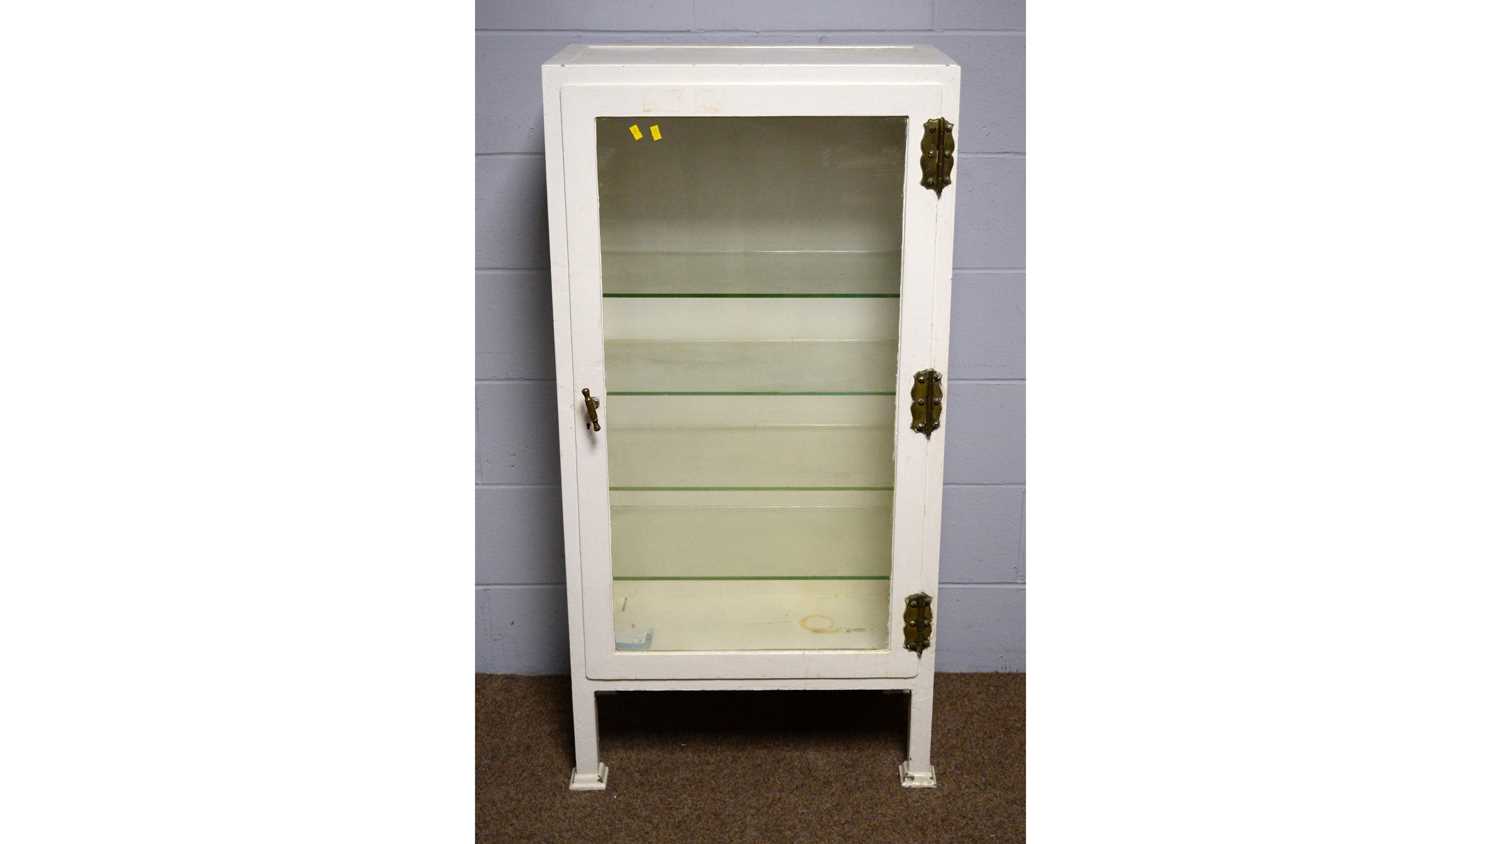 Lot 24 - A vintage white-painted metal surgical instrument display cabinet.